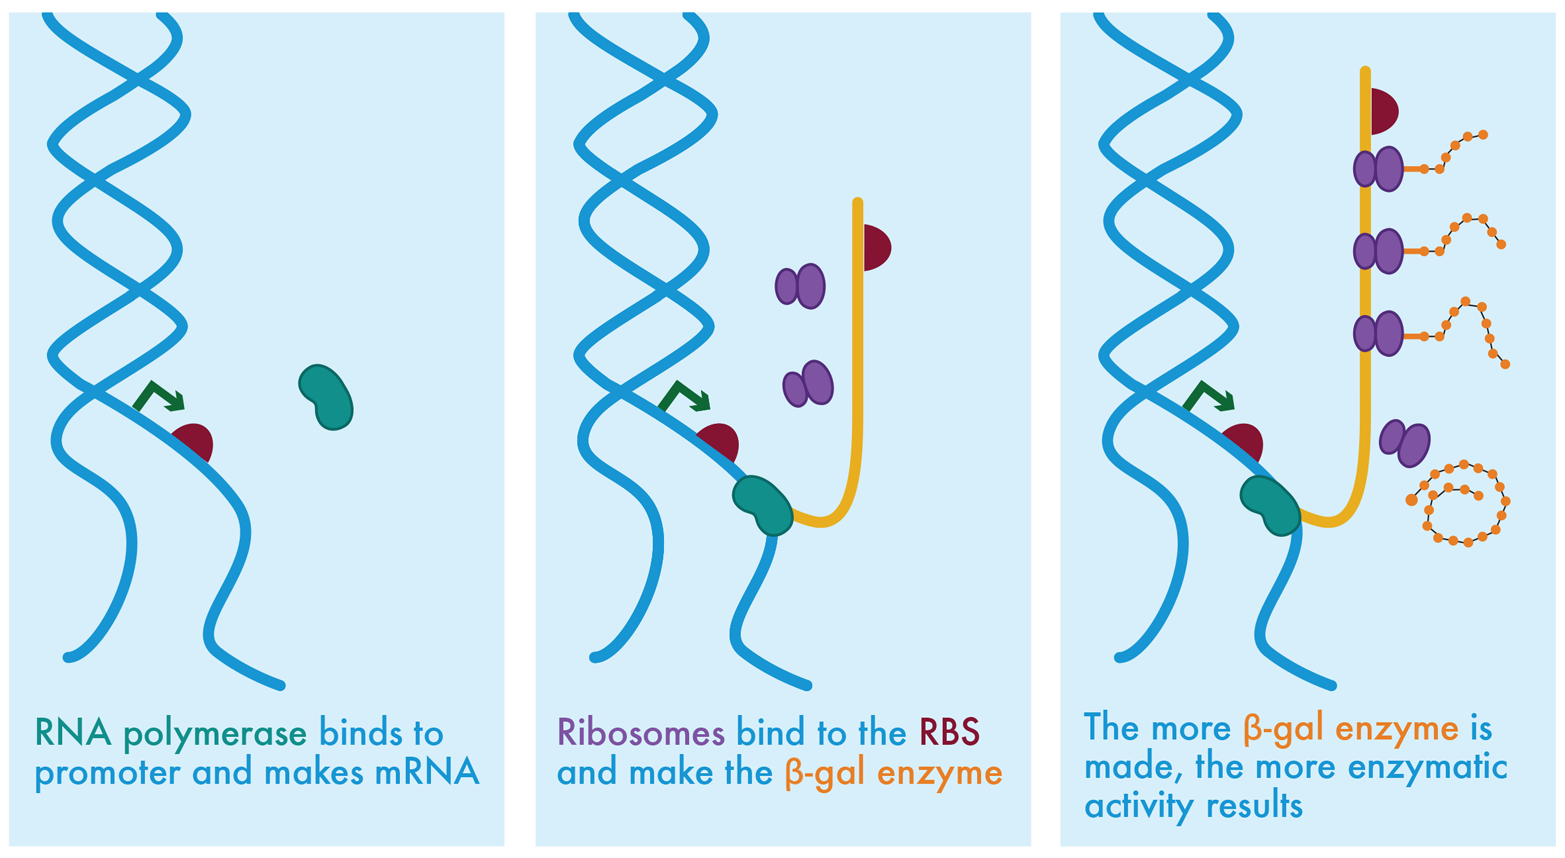 Molecular biology’s central dogma. In the leftmost panel, RNA polymerase (green bean shape) is shown near the promoter region of unwound DNA. The promoter region consists of the promoter (green arrow) and the RBS (maroon semicircle). In the center panel, the RNA polymerase has bound to the promoter and started to transcribe the mRNA (shown as an orange strip). Ribosomes, shown as purple shapes, are collecting near the ribosome binding site on the mRNA. Translation of the mRNA into proteins is shown on the right, with synthesis of the orange protein progressing as each ribosome translates farther along the mRNA.